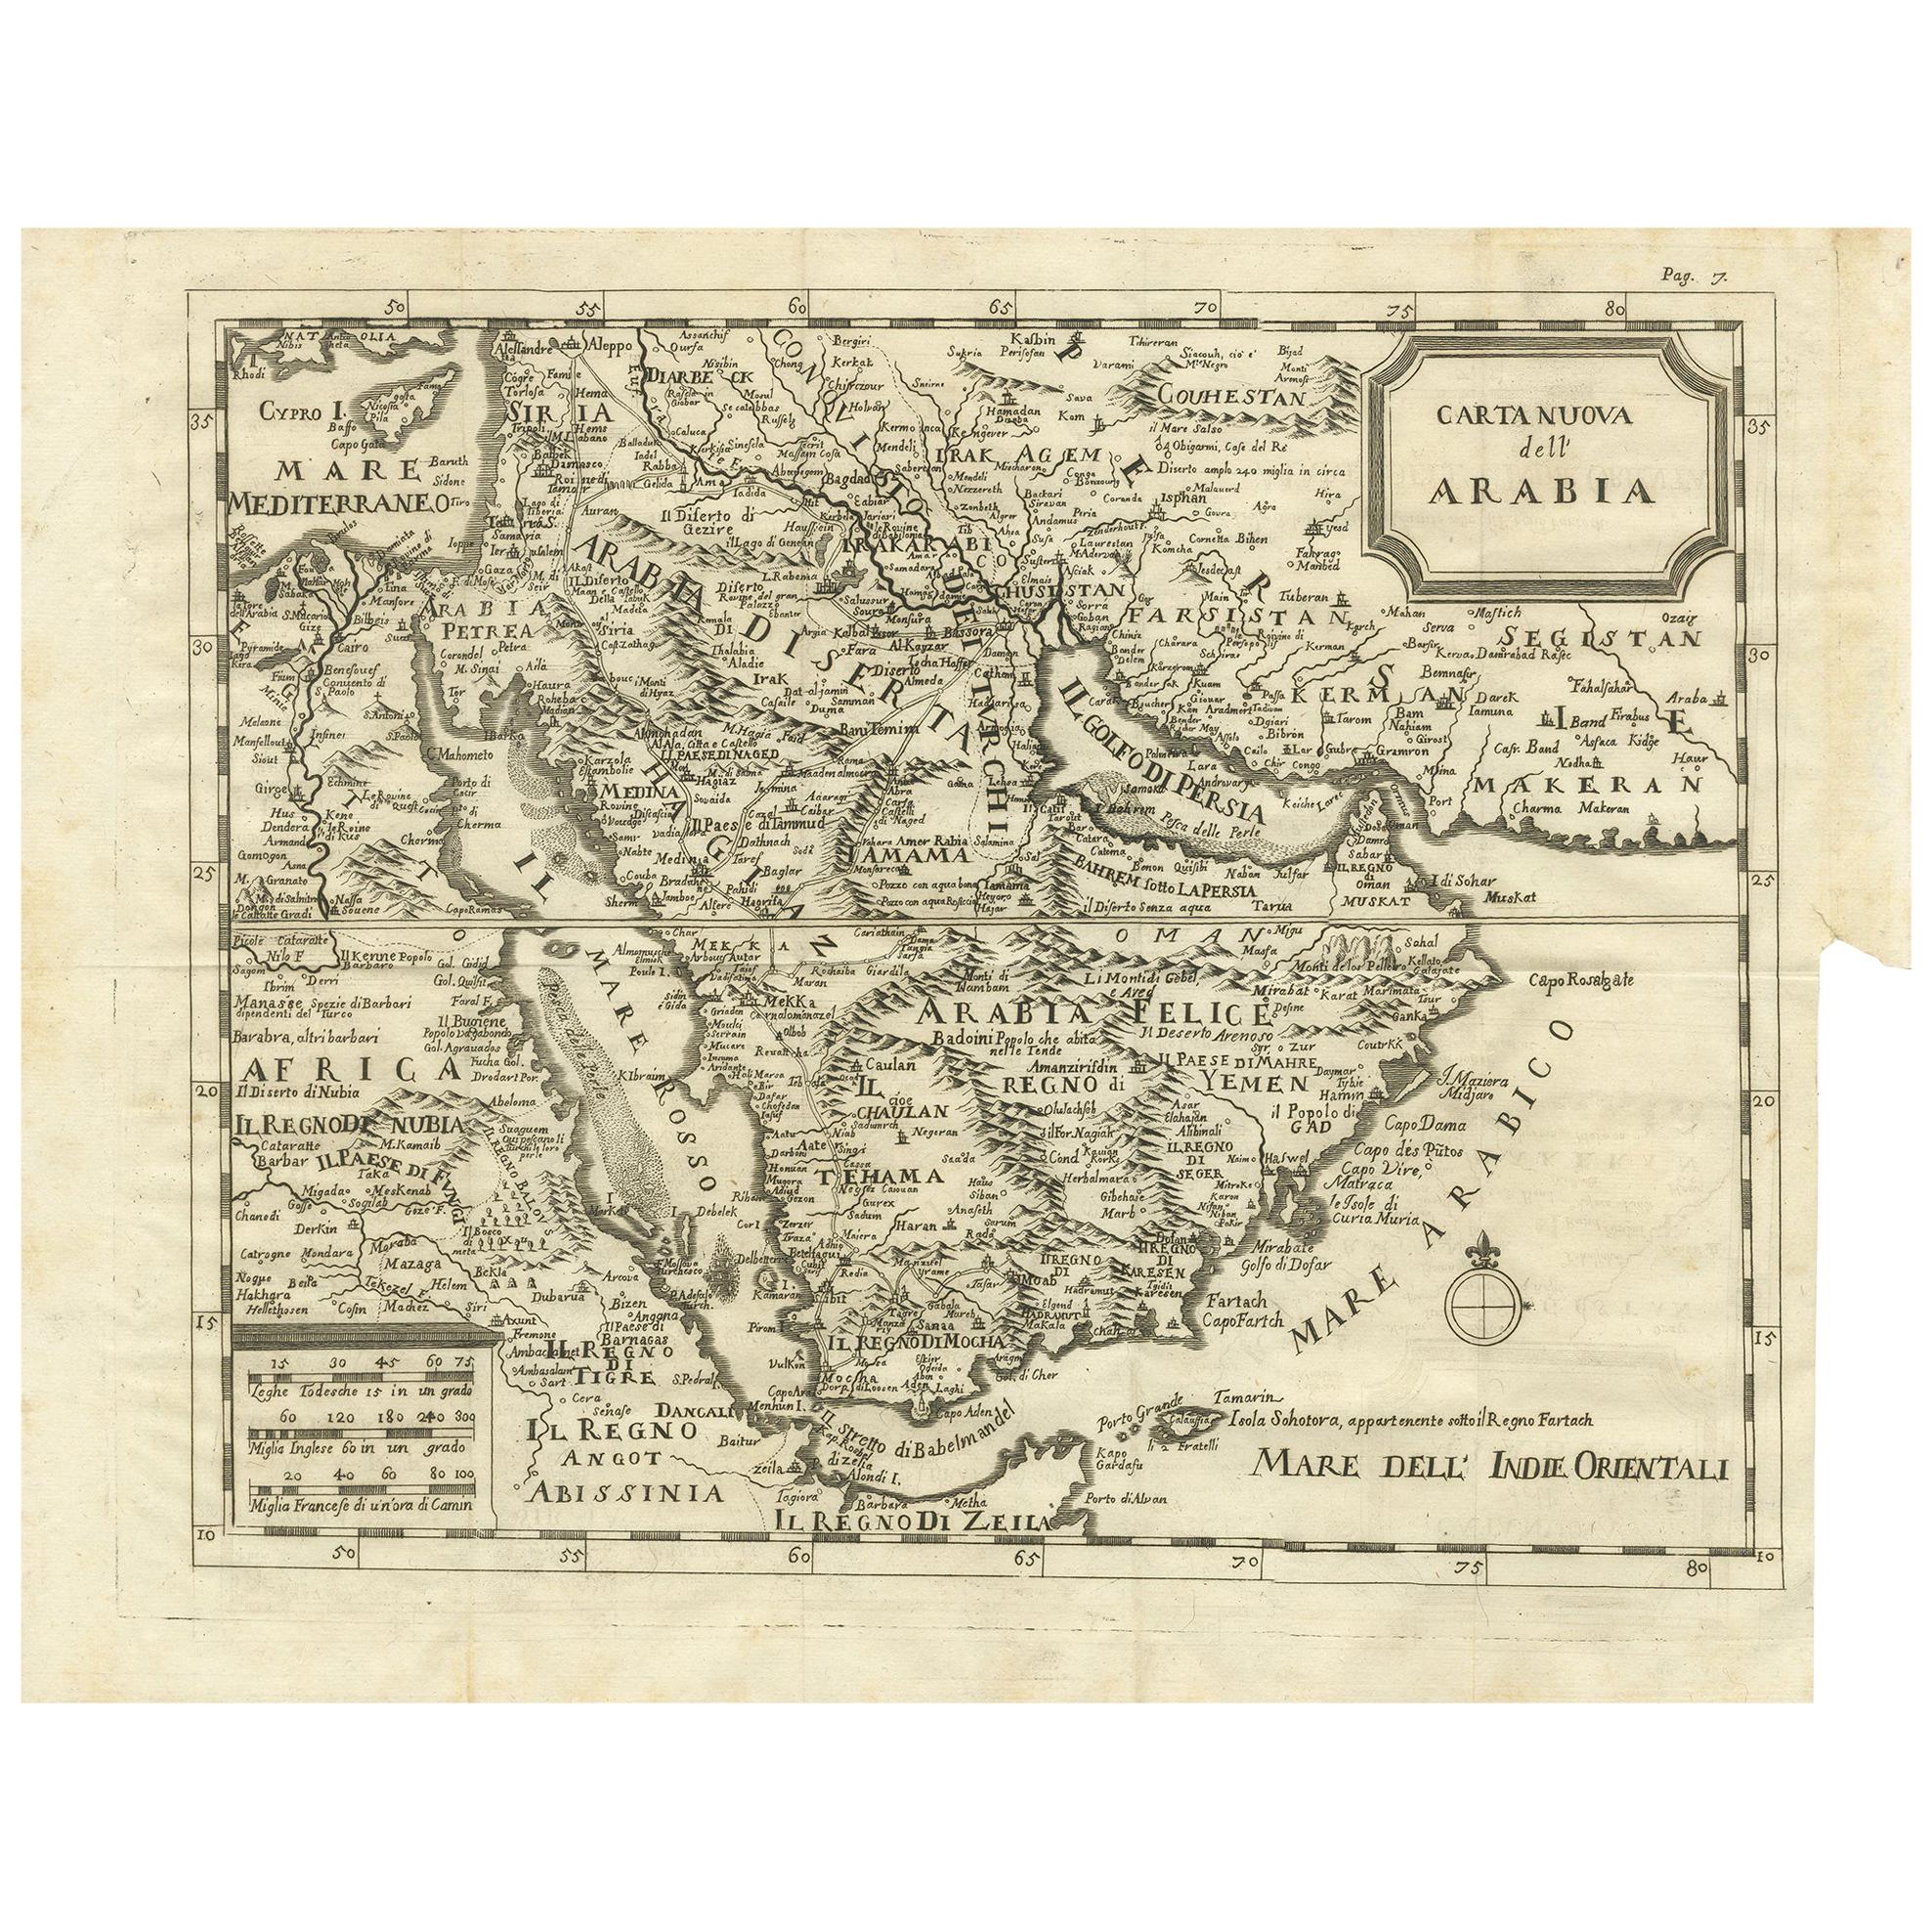 Antique Map of Arabia by Boulainvilliers, 1745